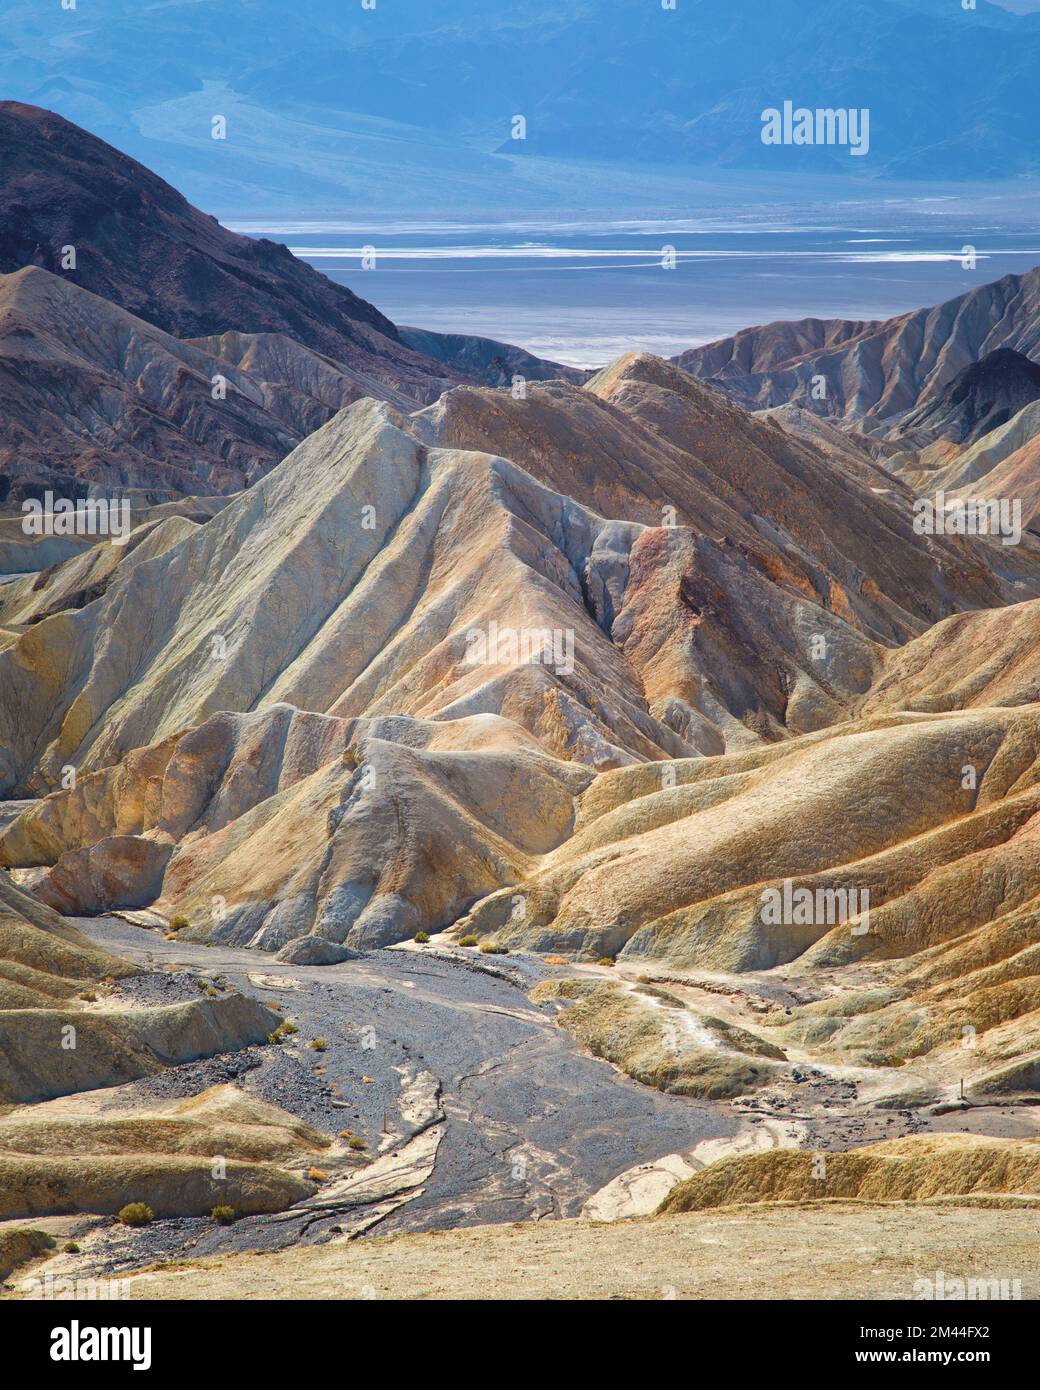 The bone-dry formations around Zabriskie Point in Death Valley NP, California. Stock Photo